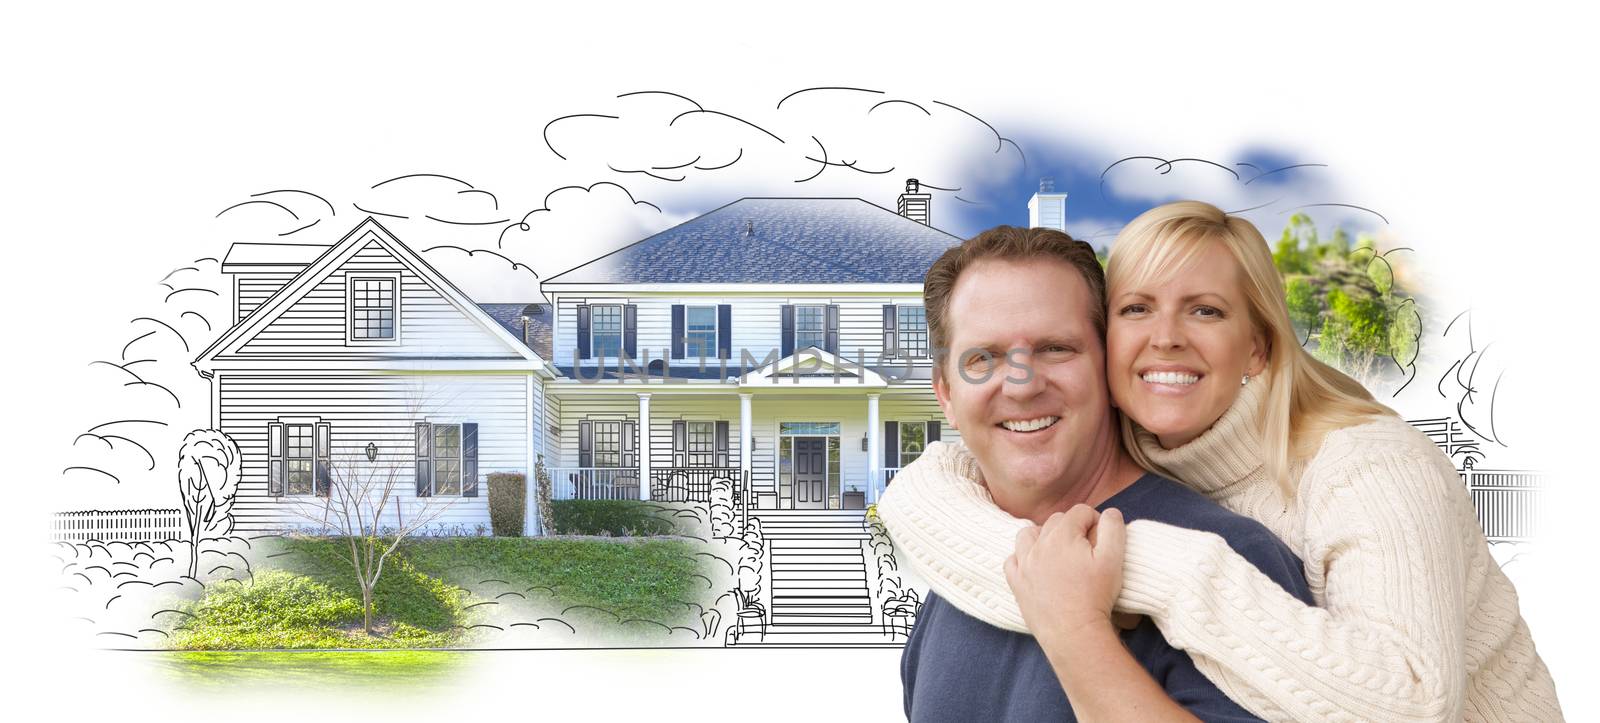 Hugging Couple Over House Drawing and Photo on White by Feverpitched